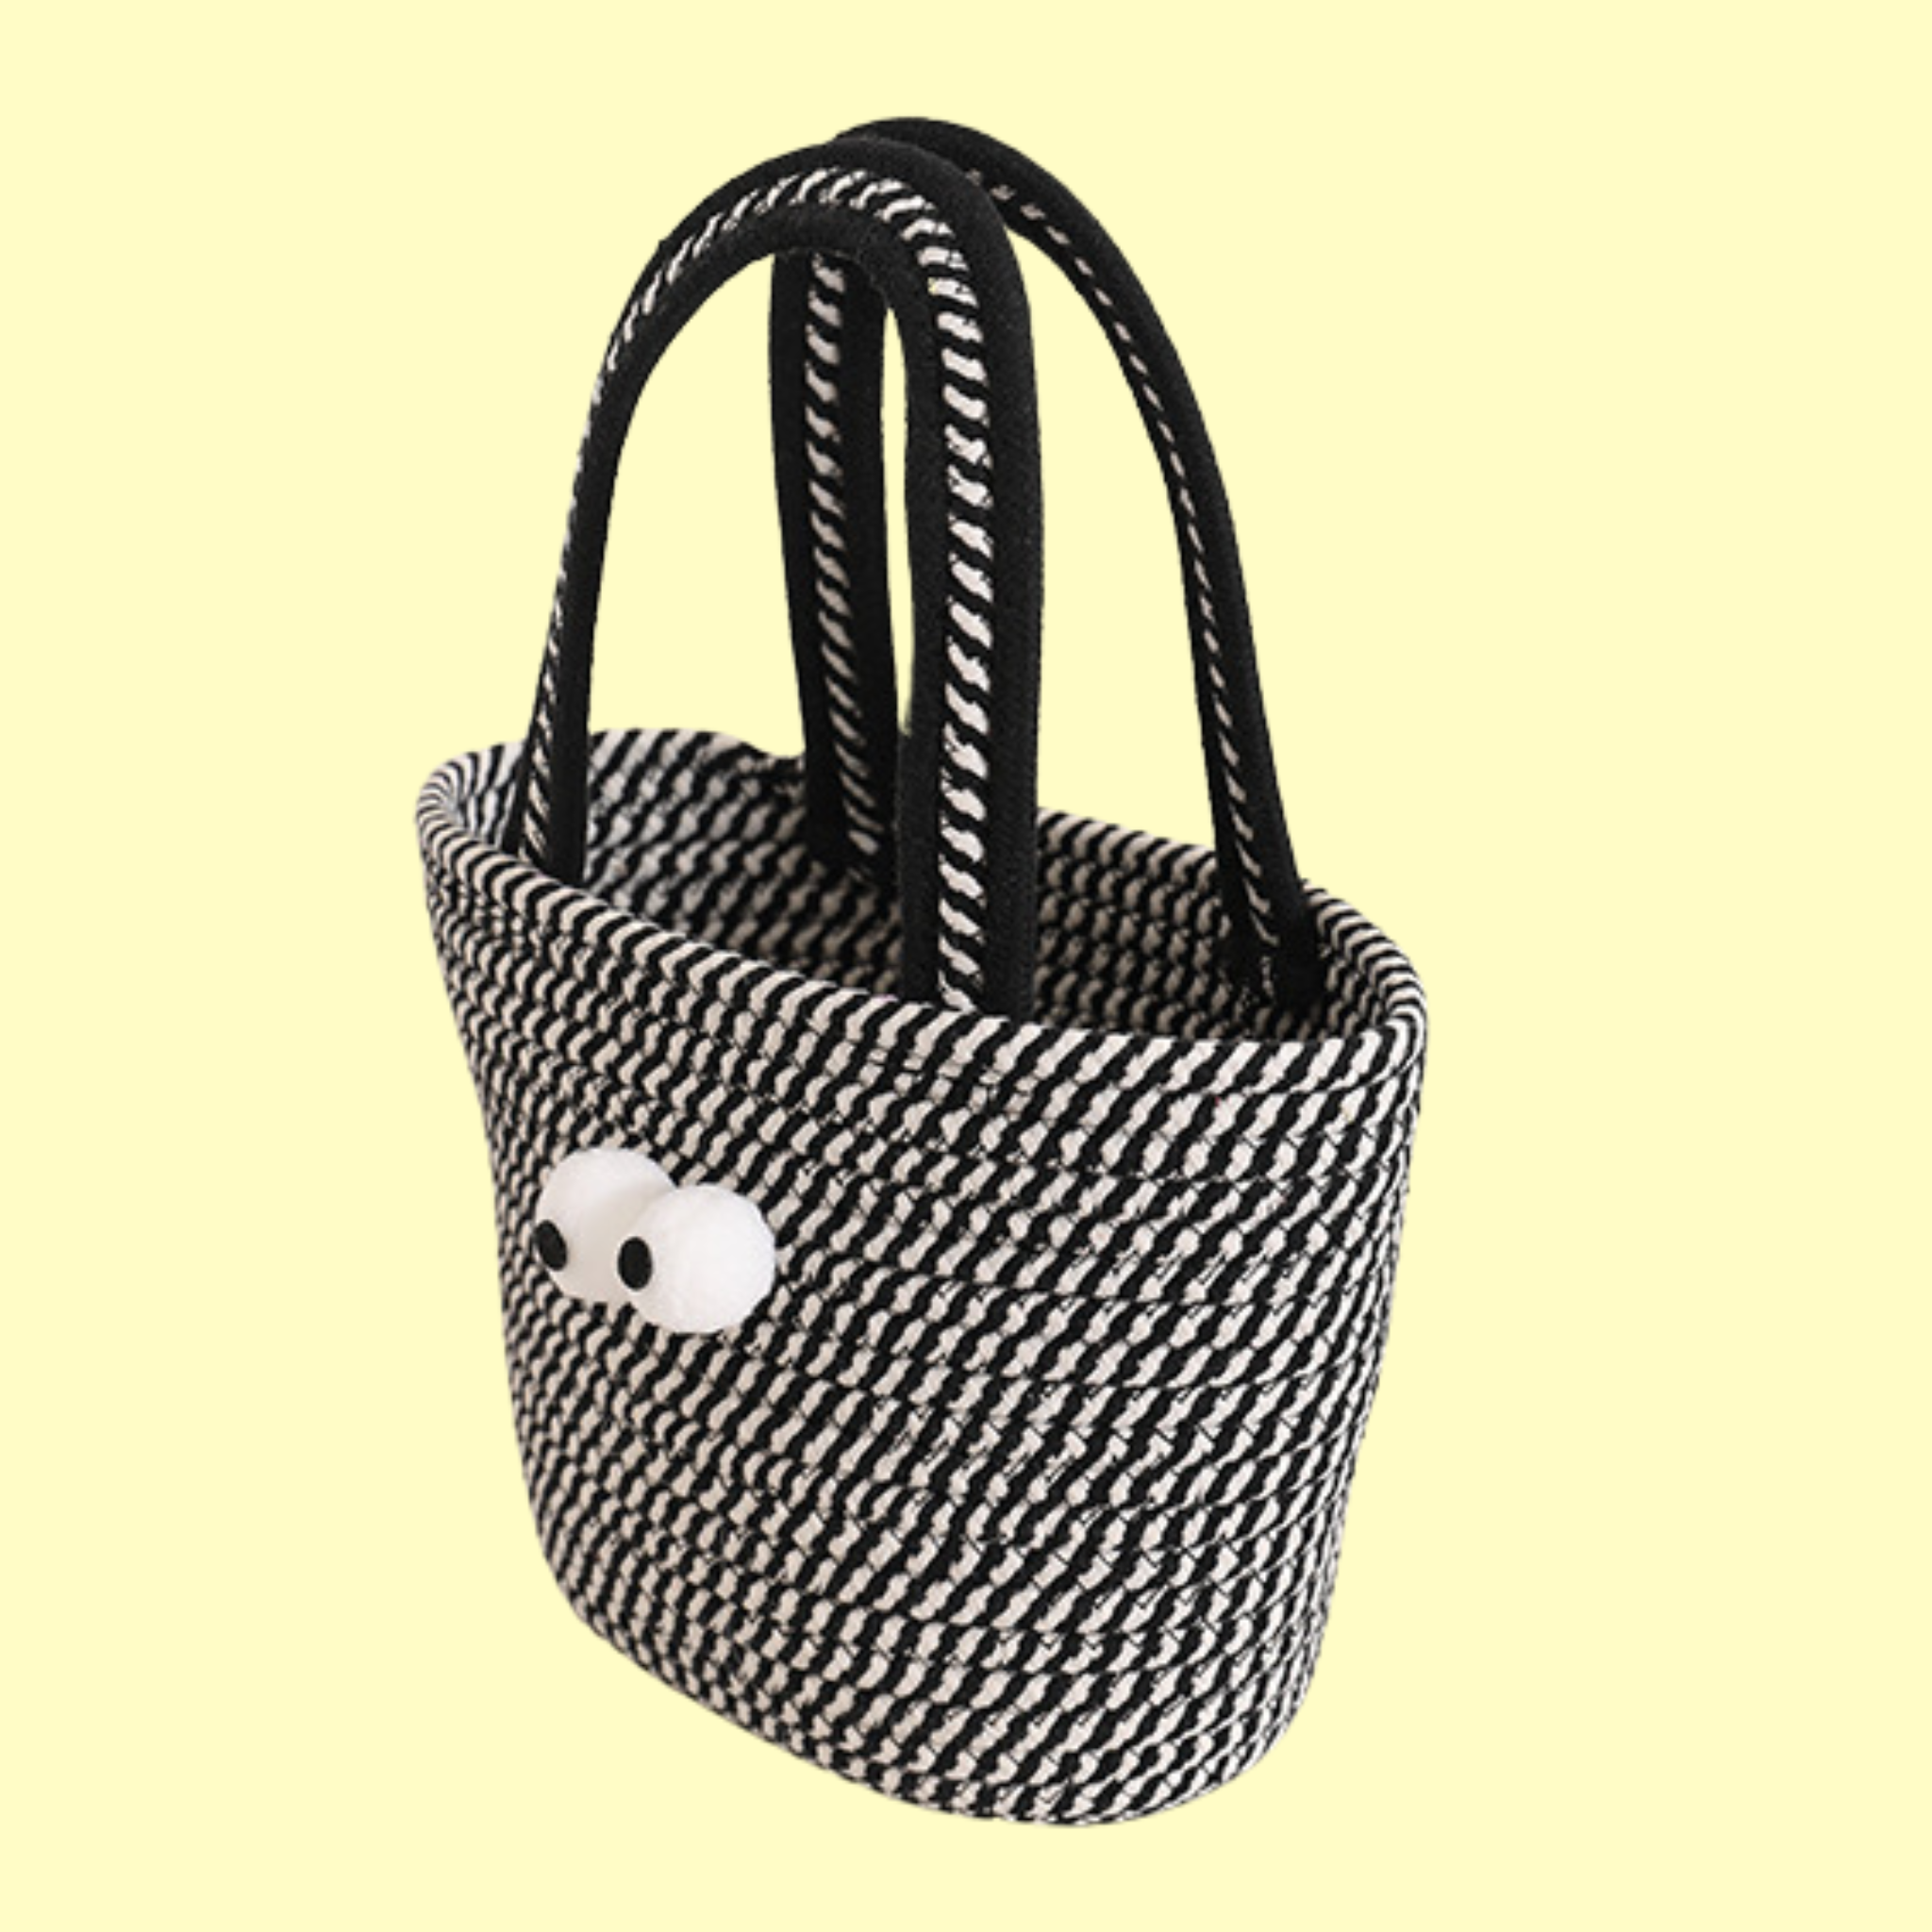 Black and White Straw Bag with Eye Detail